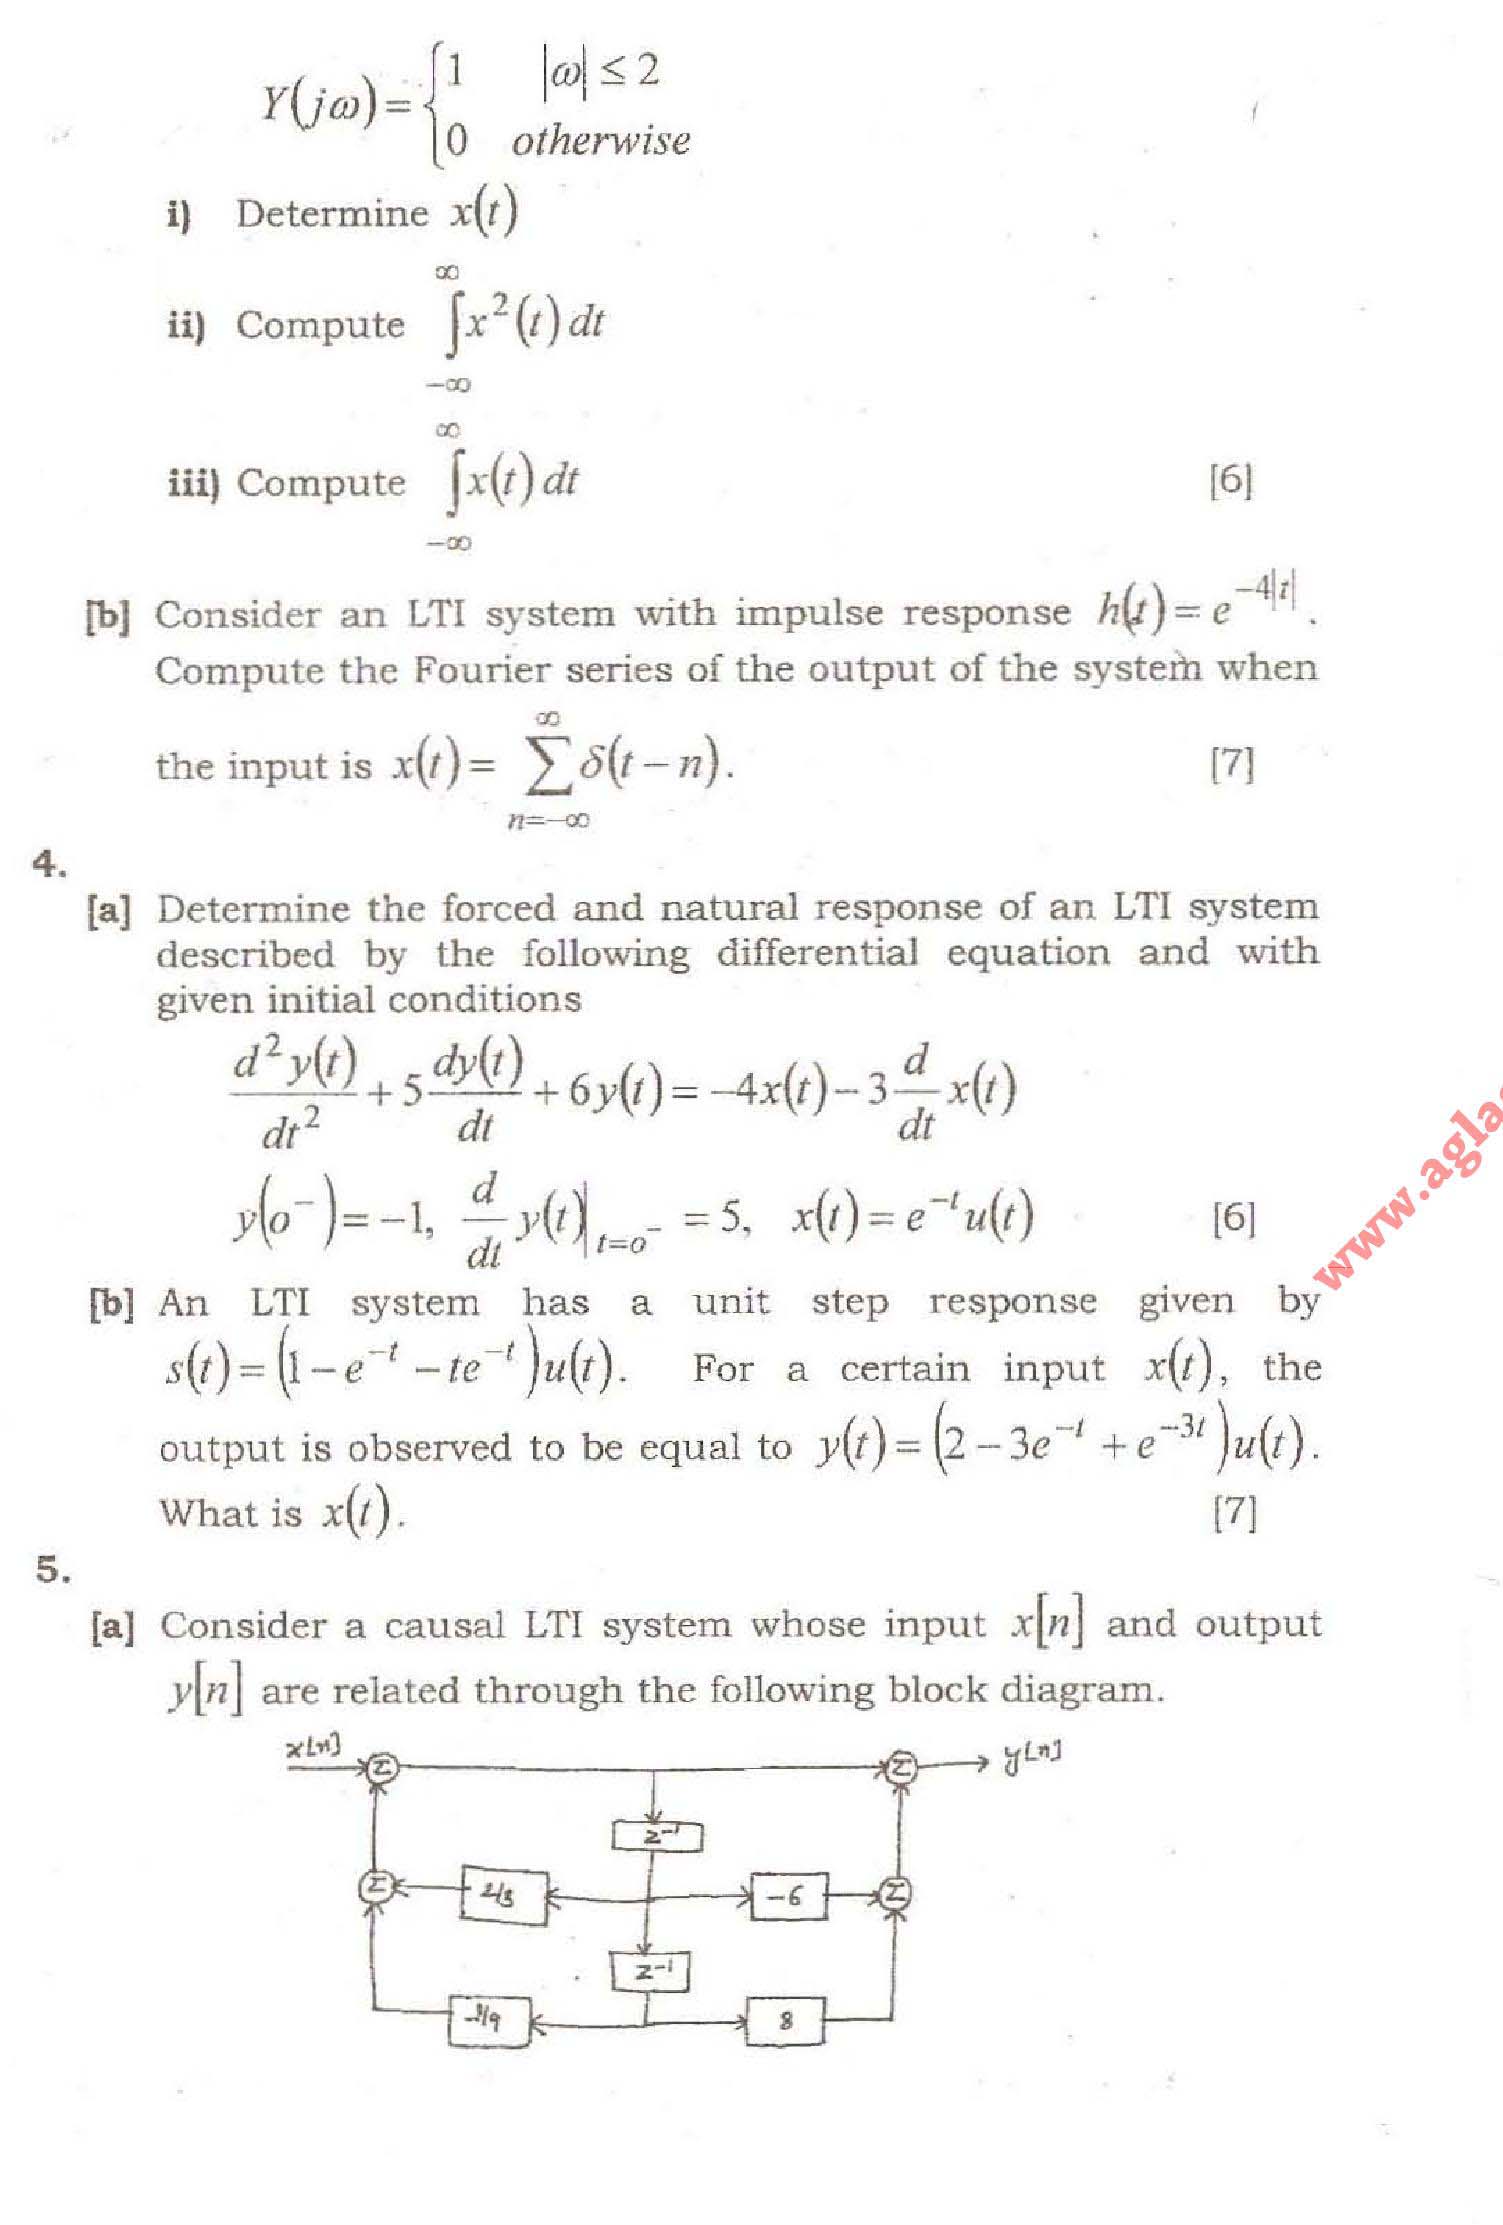 NSIT Question Papers 2008  3 Semester - End Sem - EC-COE-IC-202